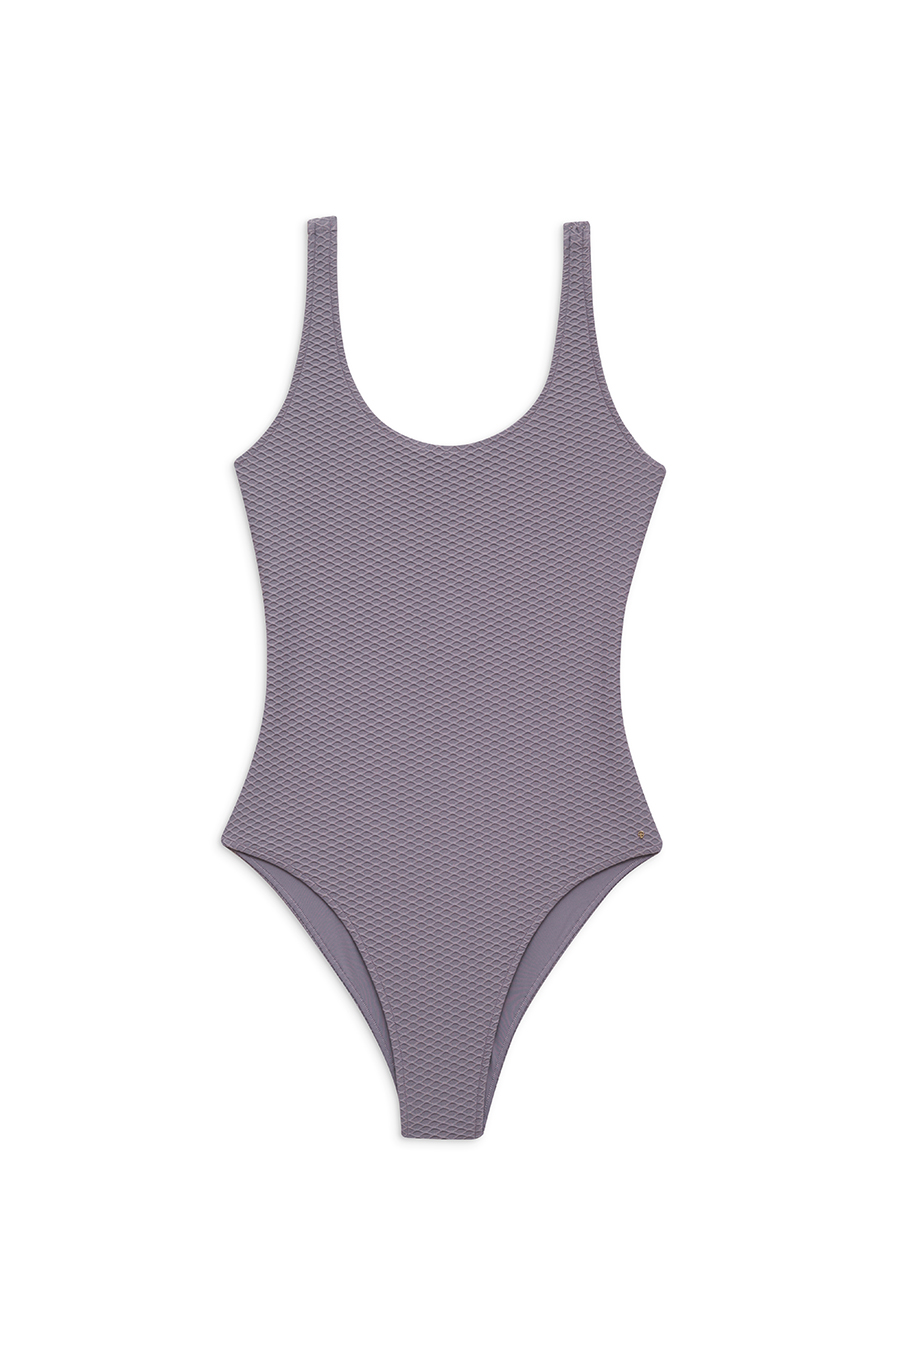 Anine Bing - Jace One Piece in Violet